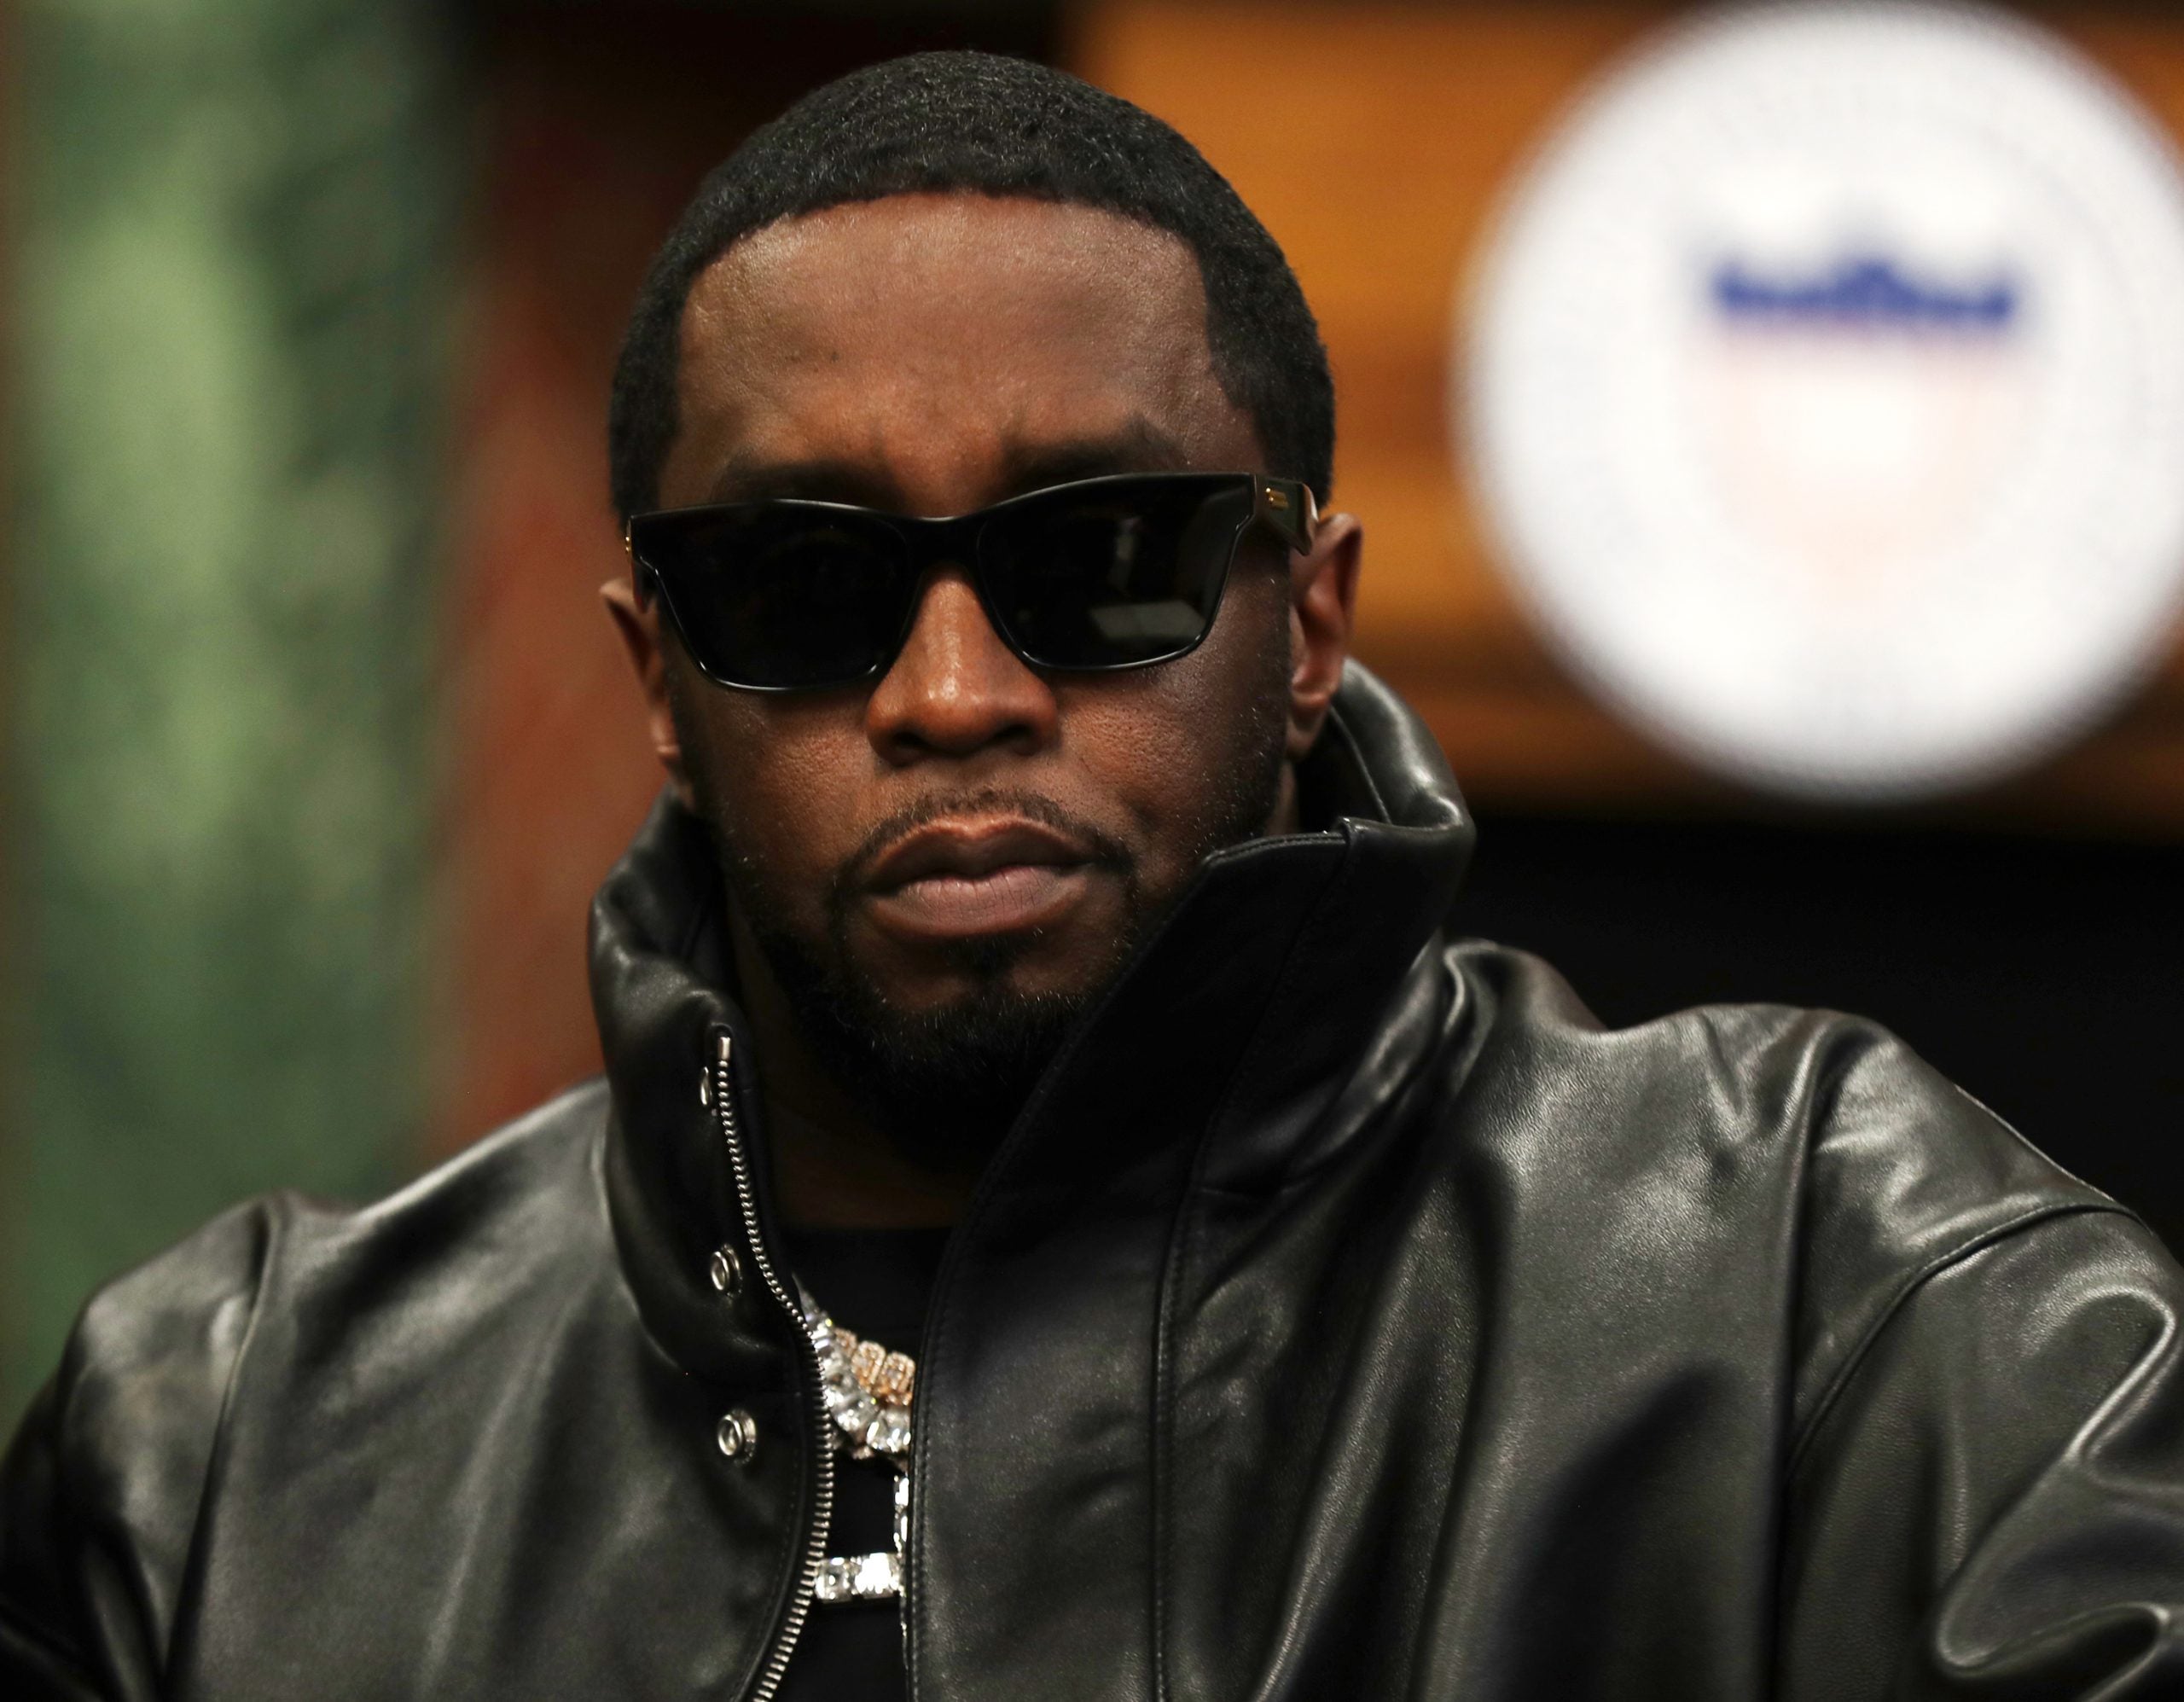 Sean ‘Diddy’ Combs’ Homes Raided In Connection With Federal Sex Trafficking Investigation